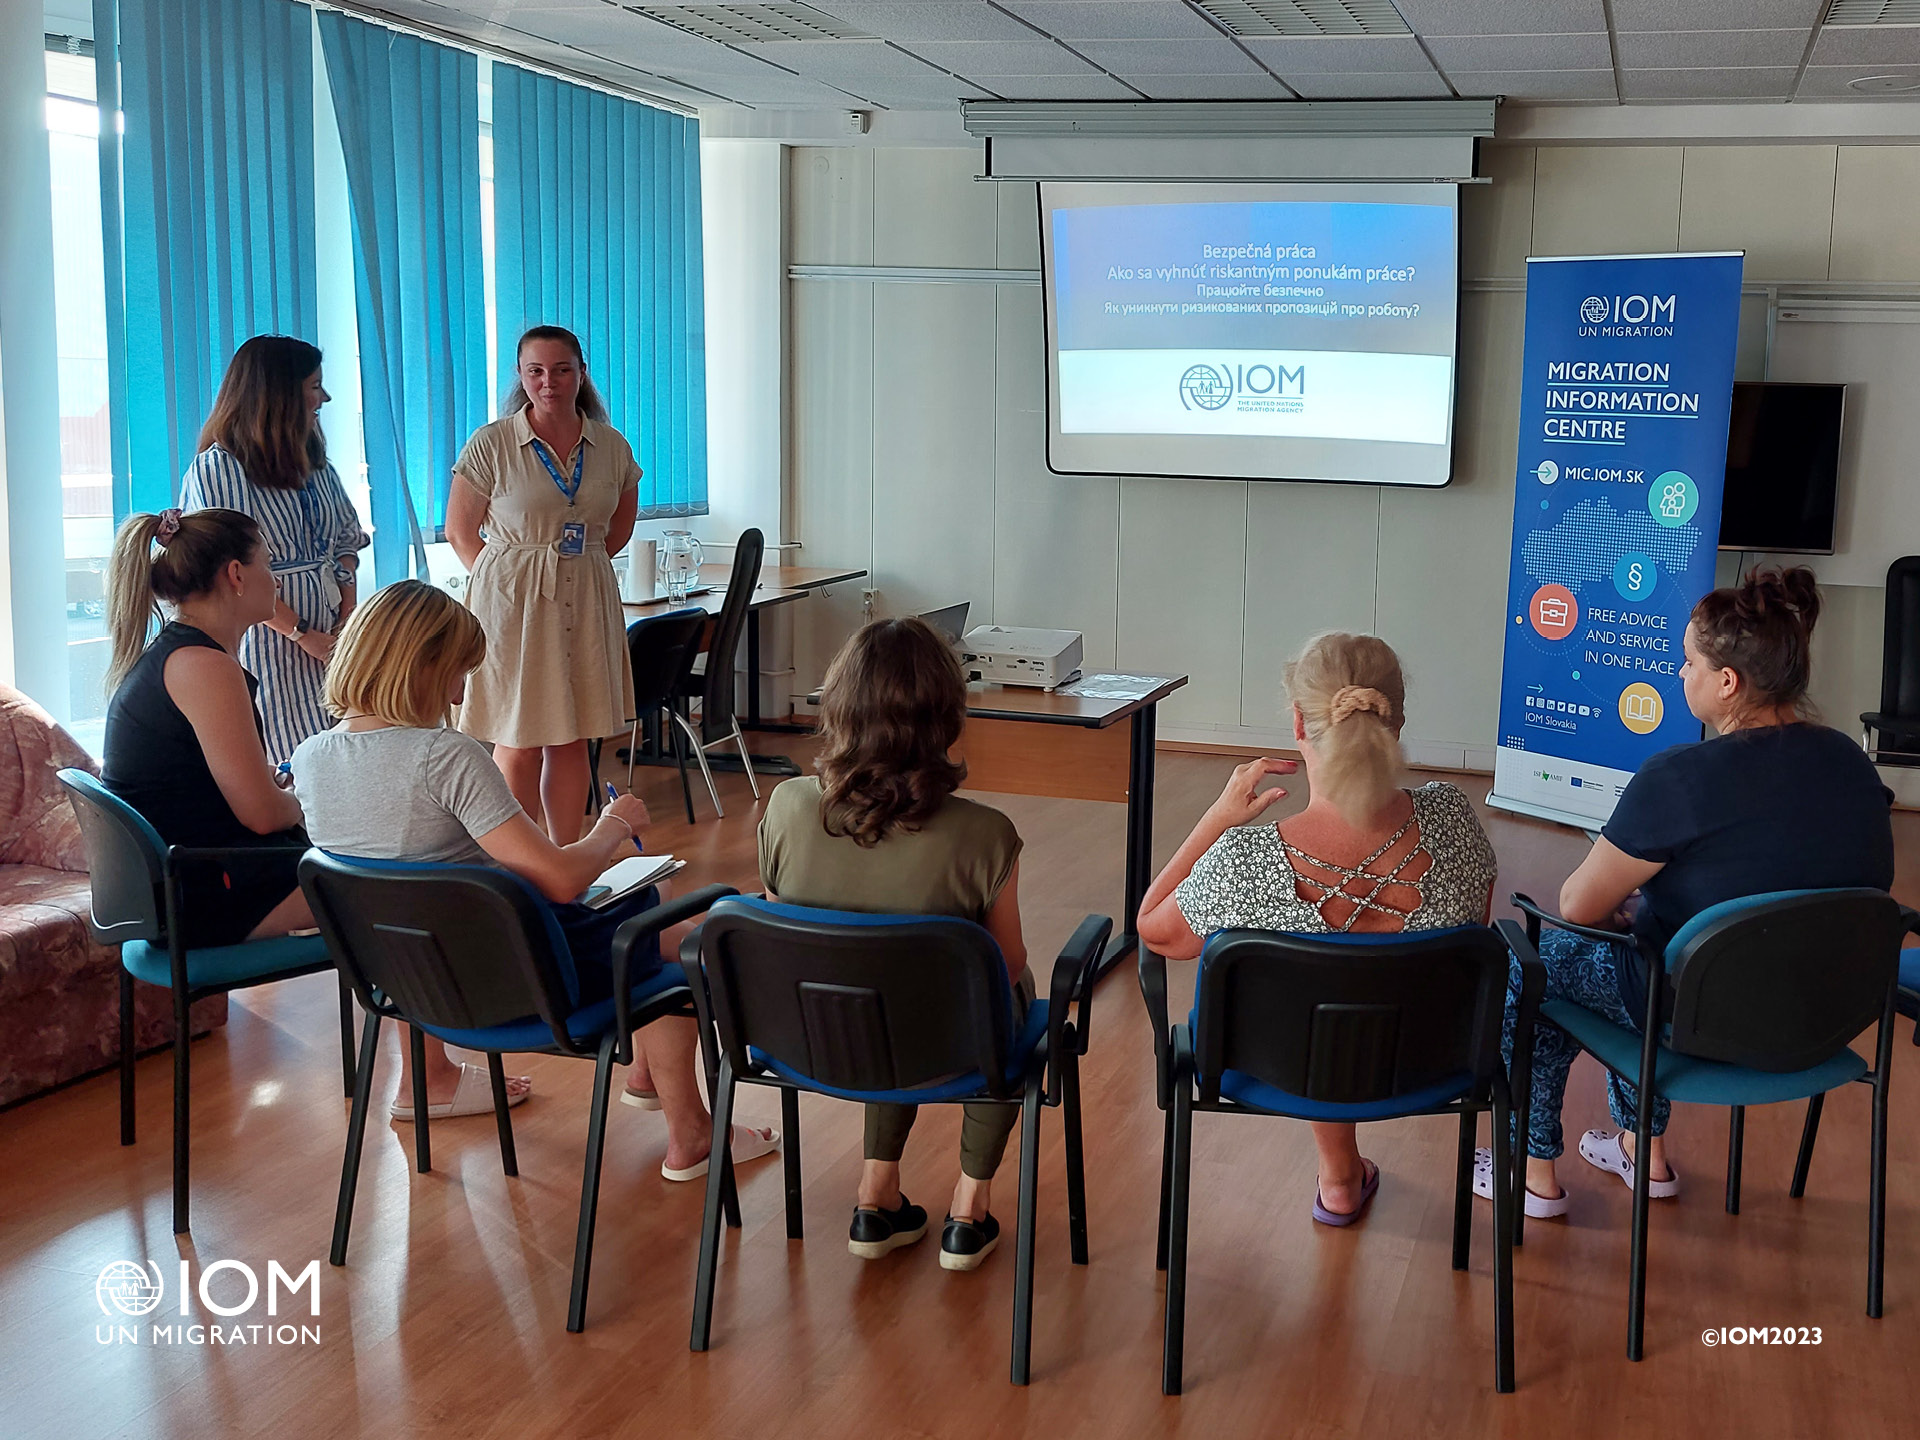 Information seminar of the IOM MIC in Zilina on 19 July 2023. Photo © International Organization for Migration (IOM) 2023.